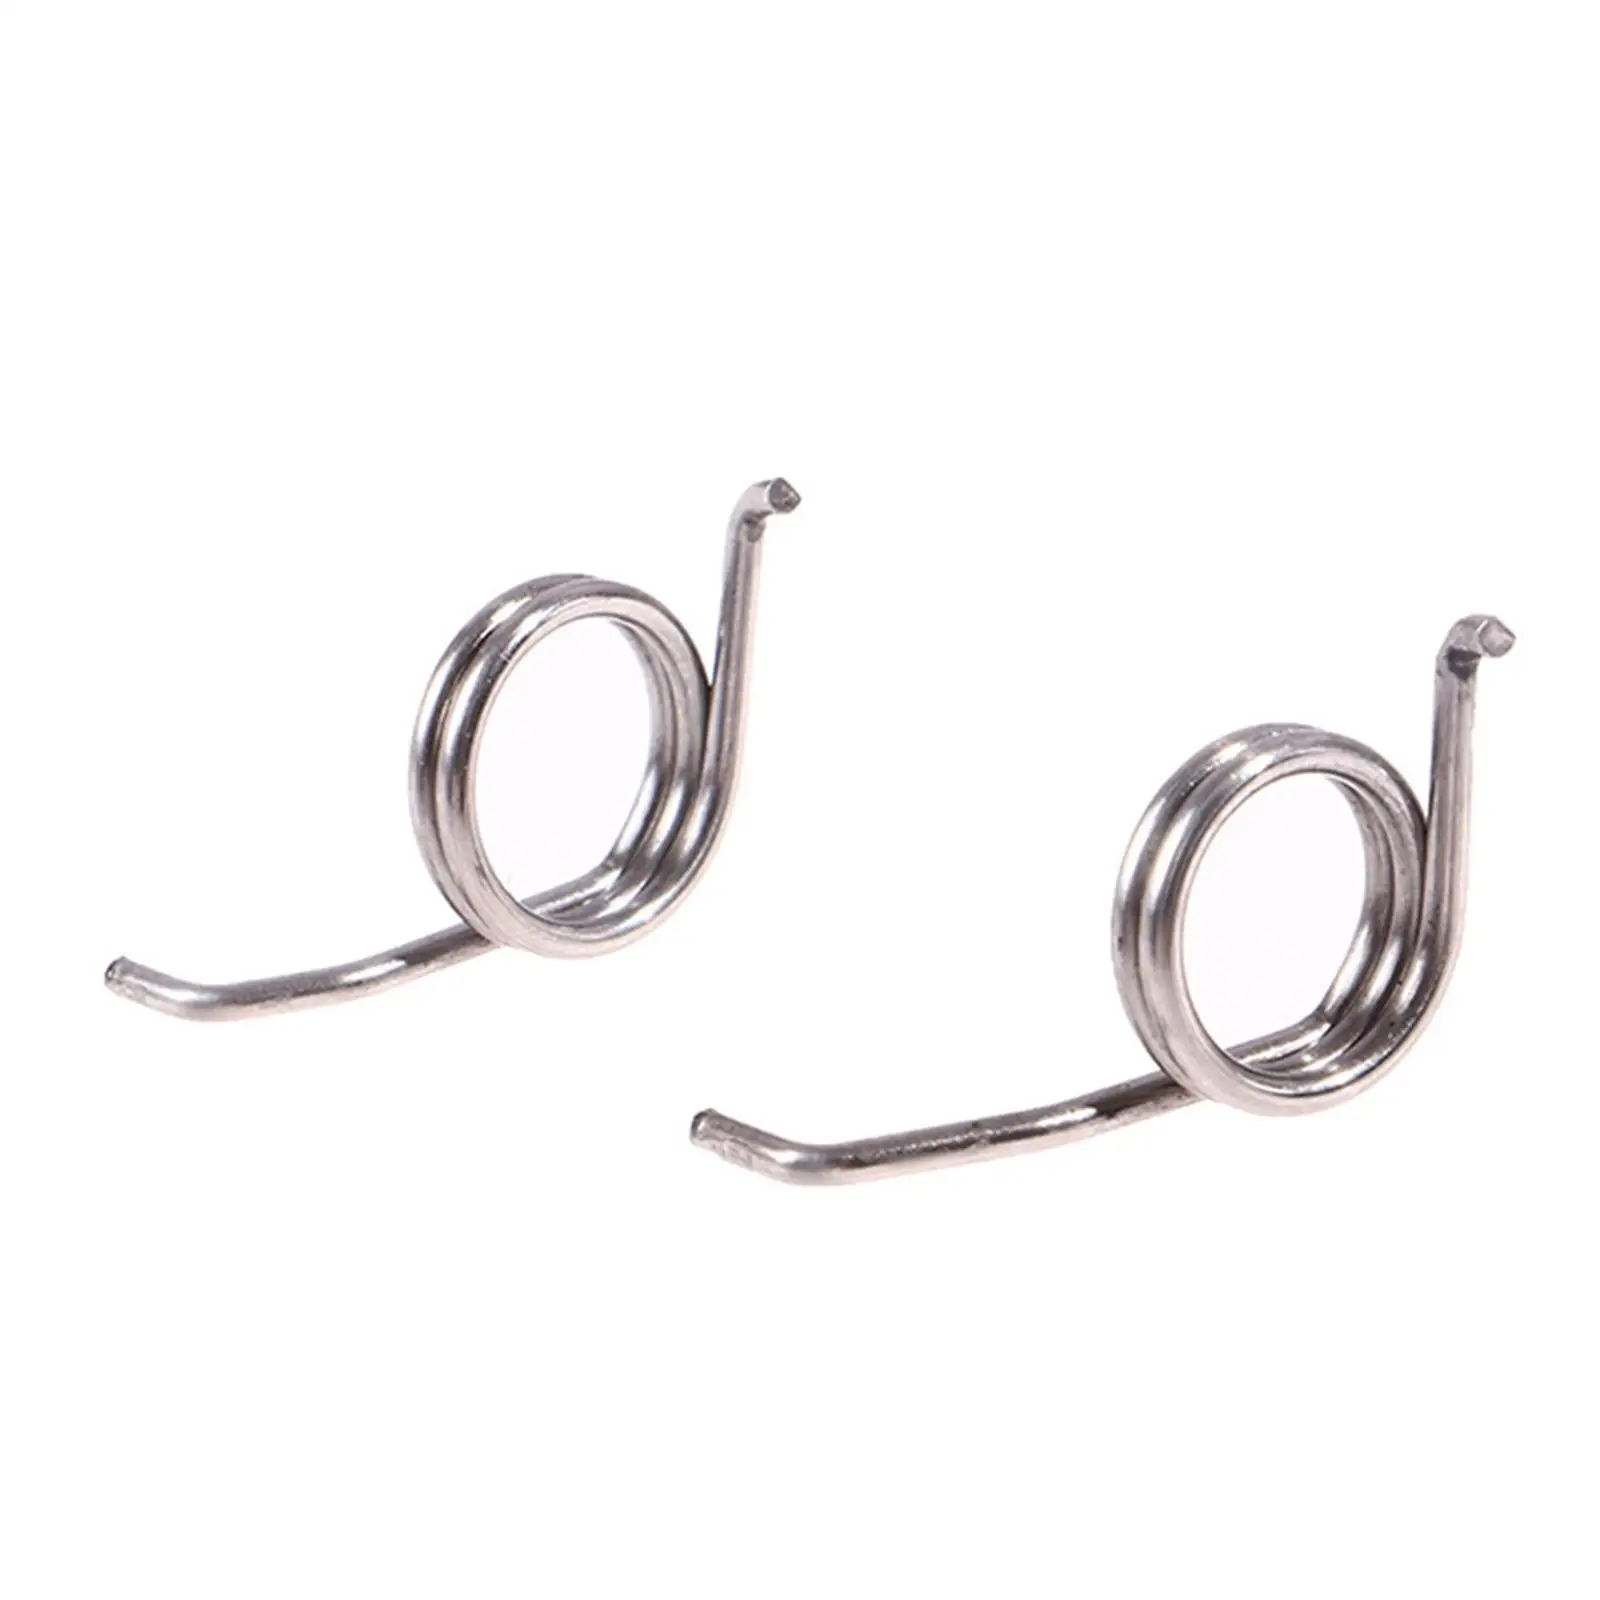 Baits Casting Water Drop Wheel Spring Modified Tool 1Pcs Bail Spring Stainless Steel Tool Kit Spare Parts Small Torsion Spring